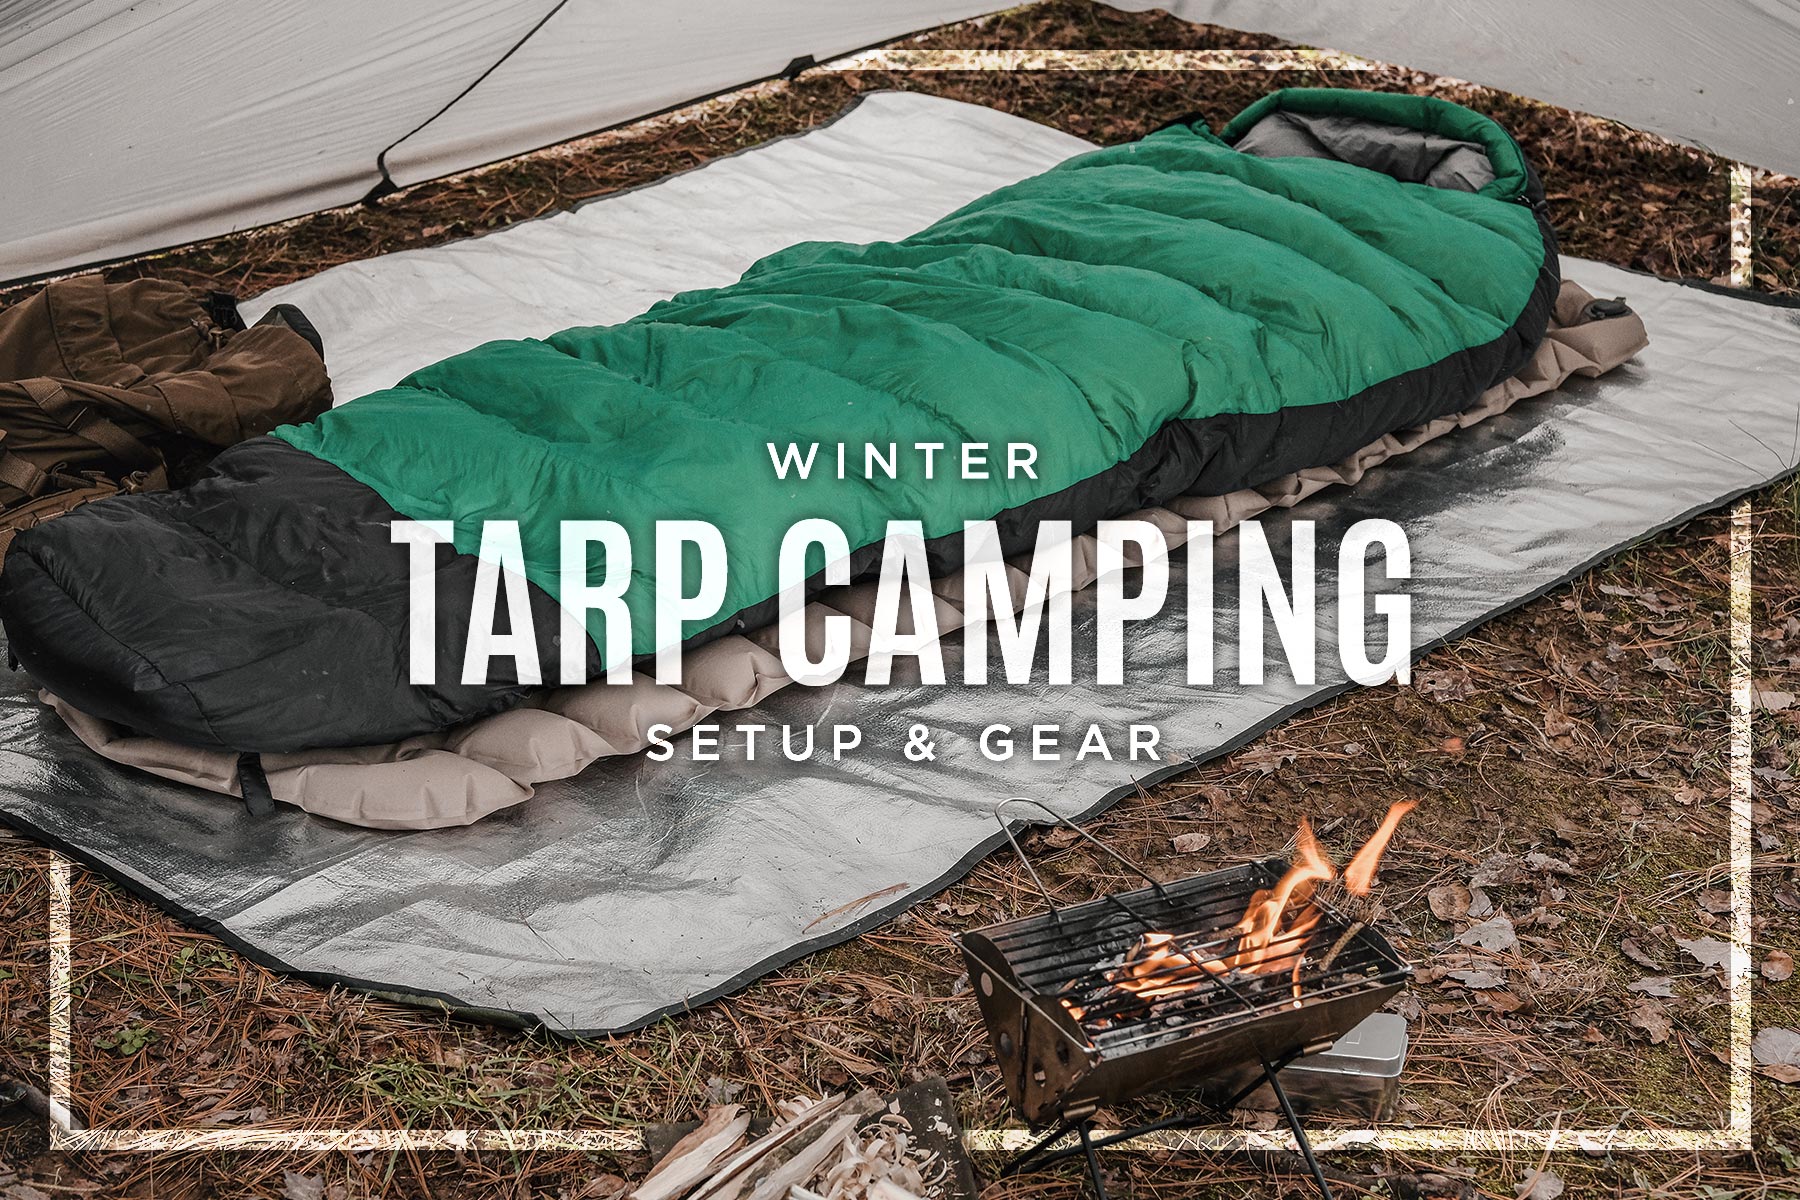 Bad omringen Levendig Winter Tarp Camping Setup • The best gear from the ground up!